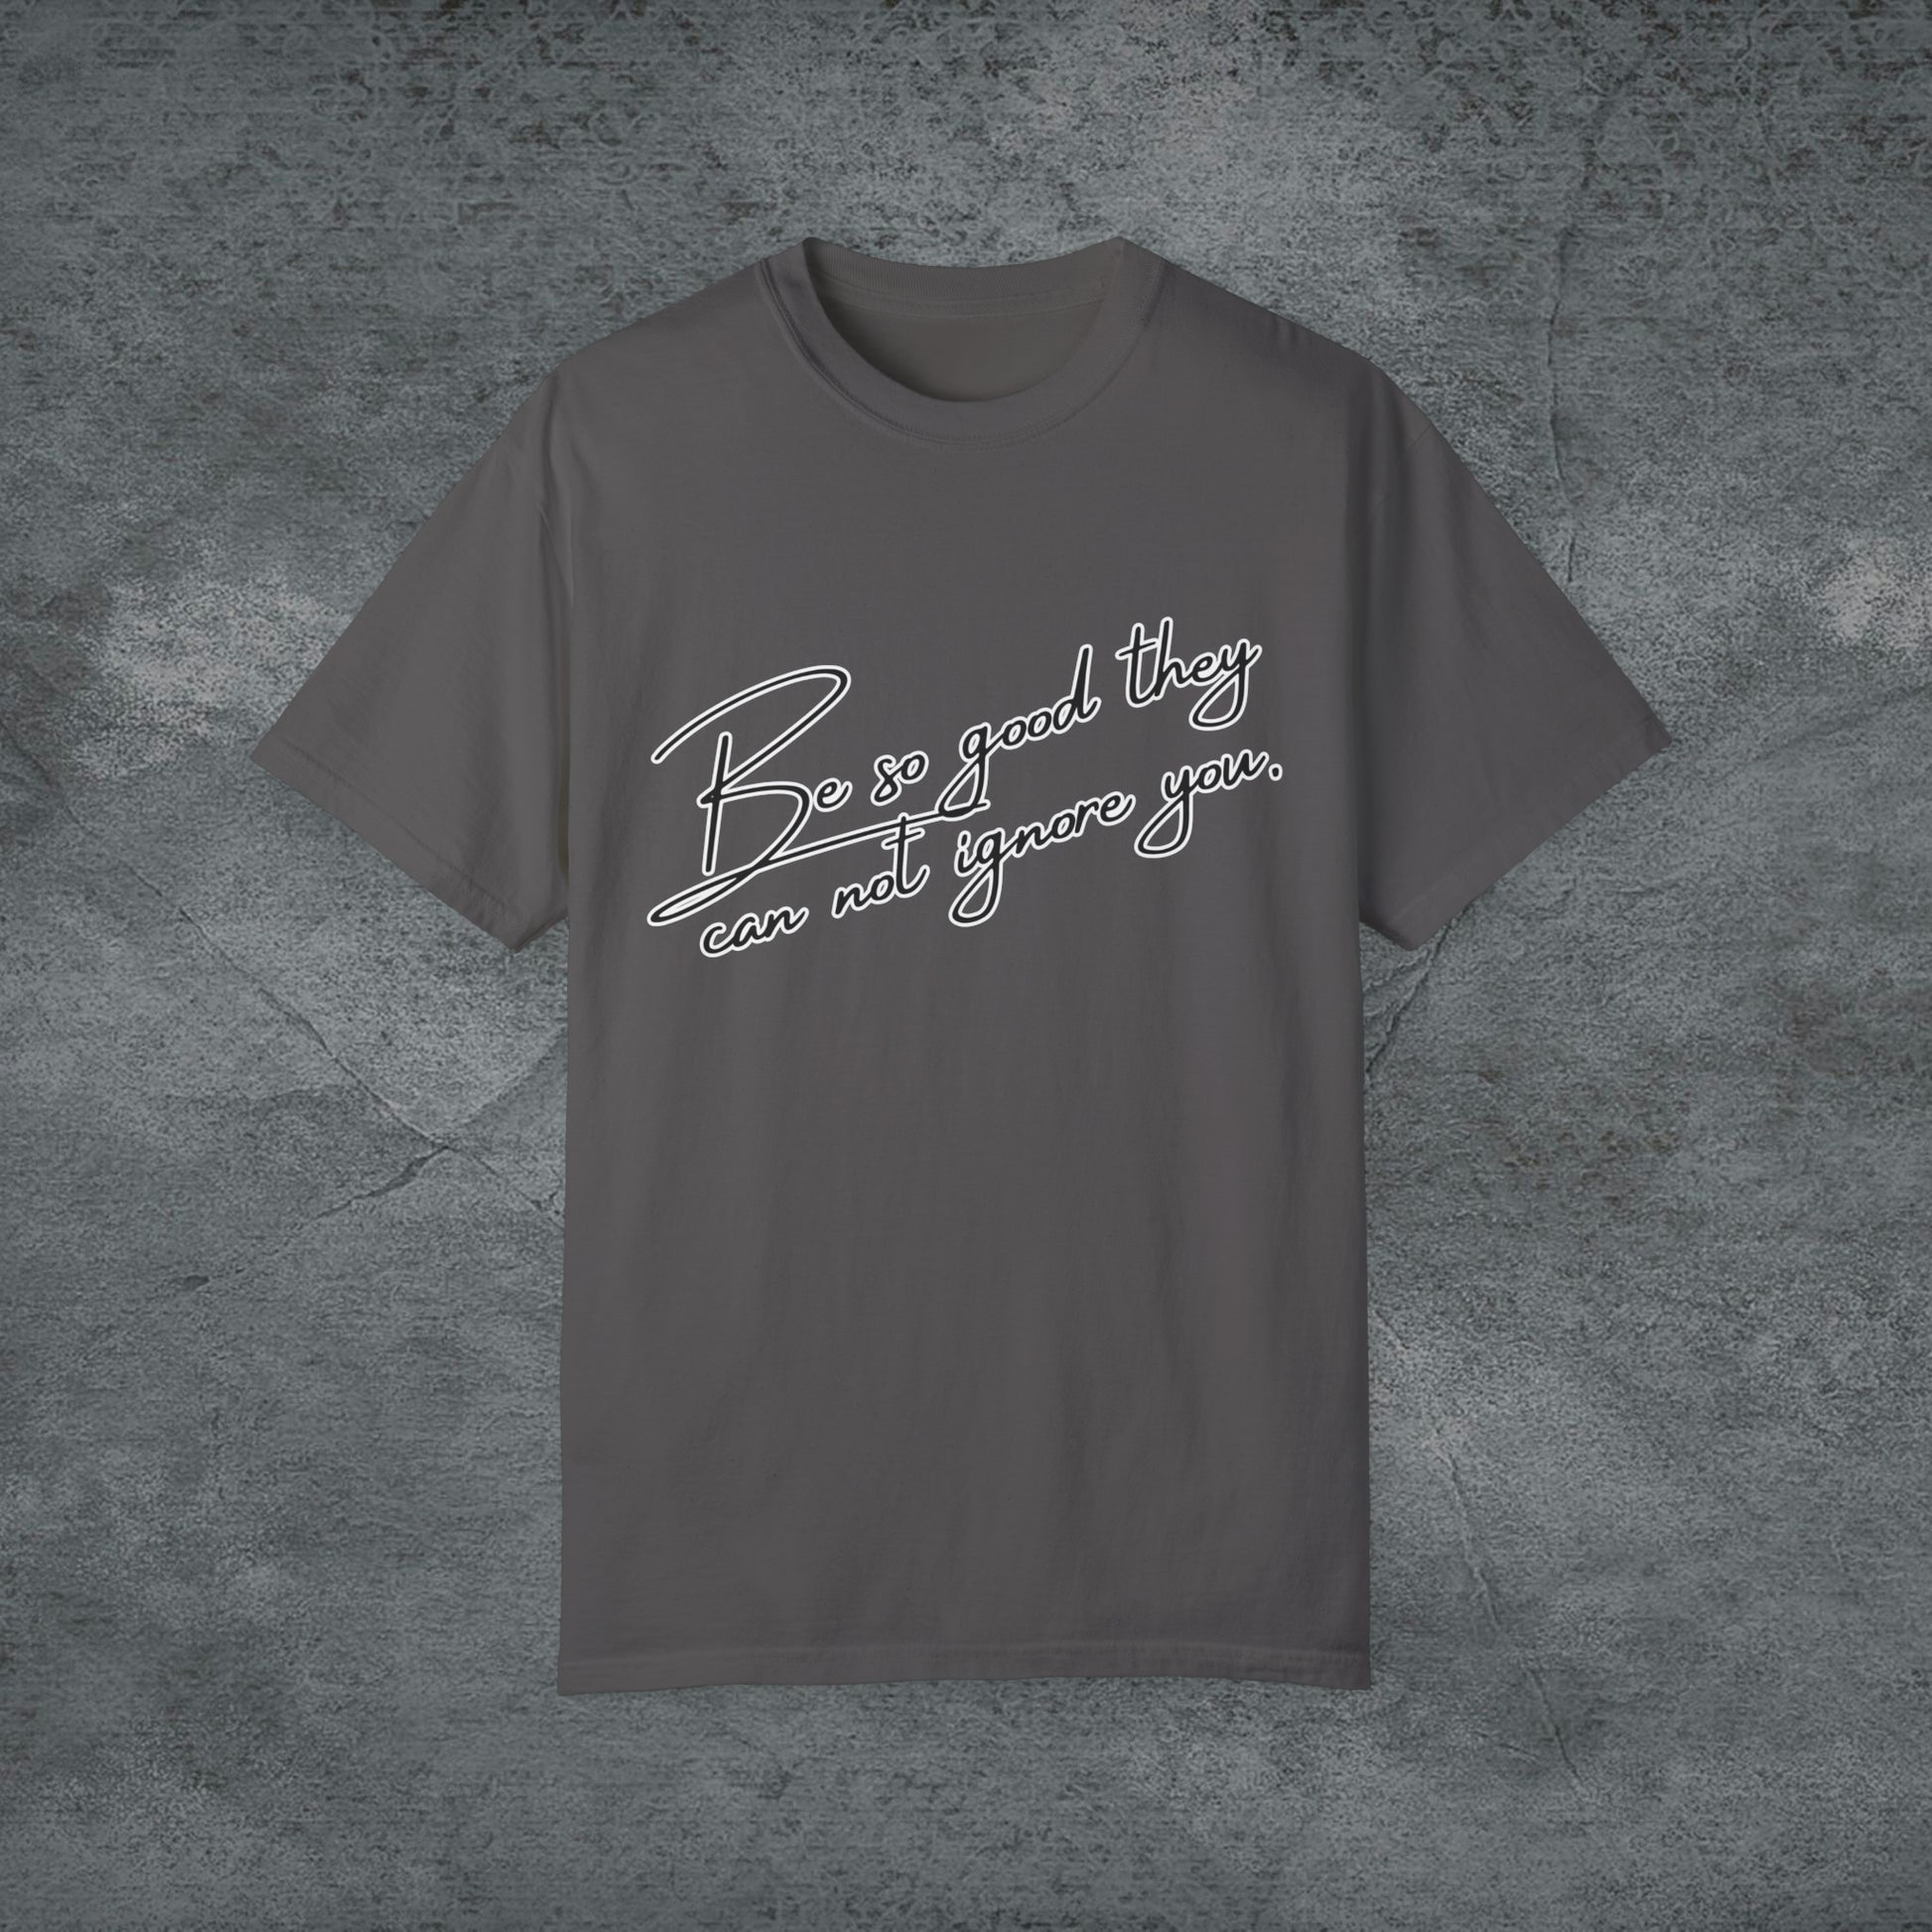 Be So Good They Can Not Ignore You - Motivational, Inspirational T-shirt USA T-Shirt Graphite S 